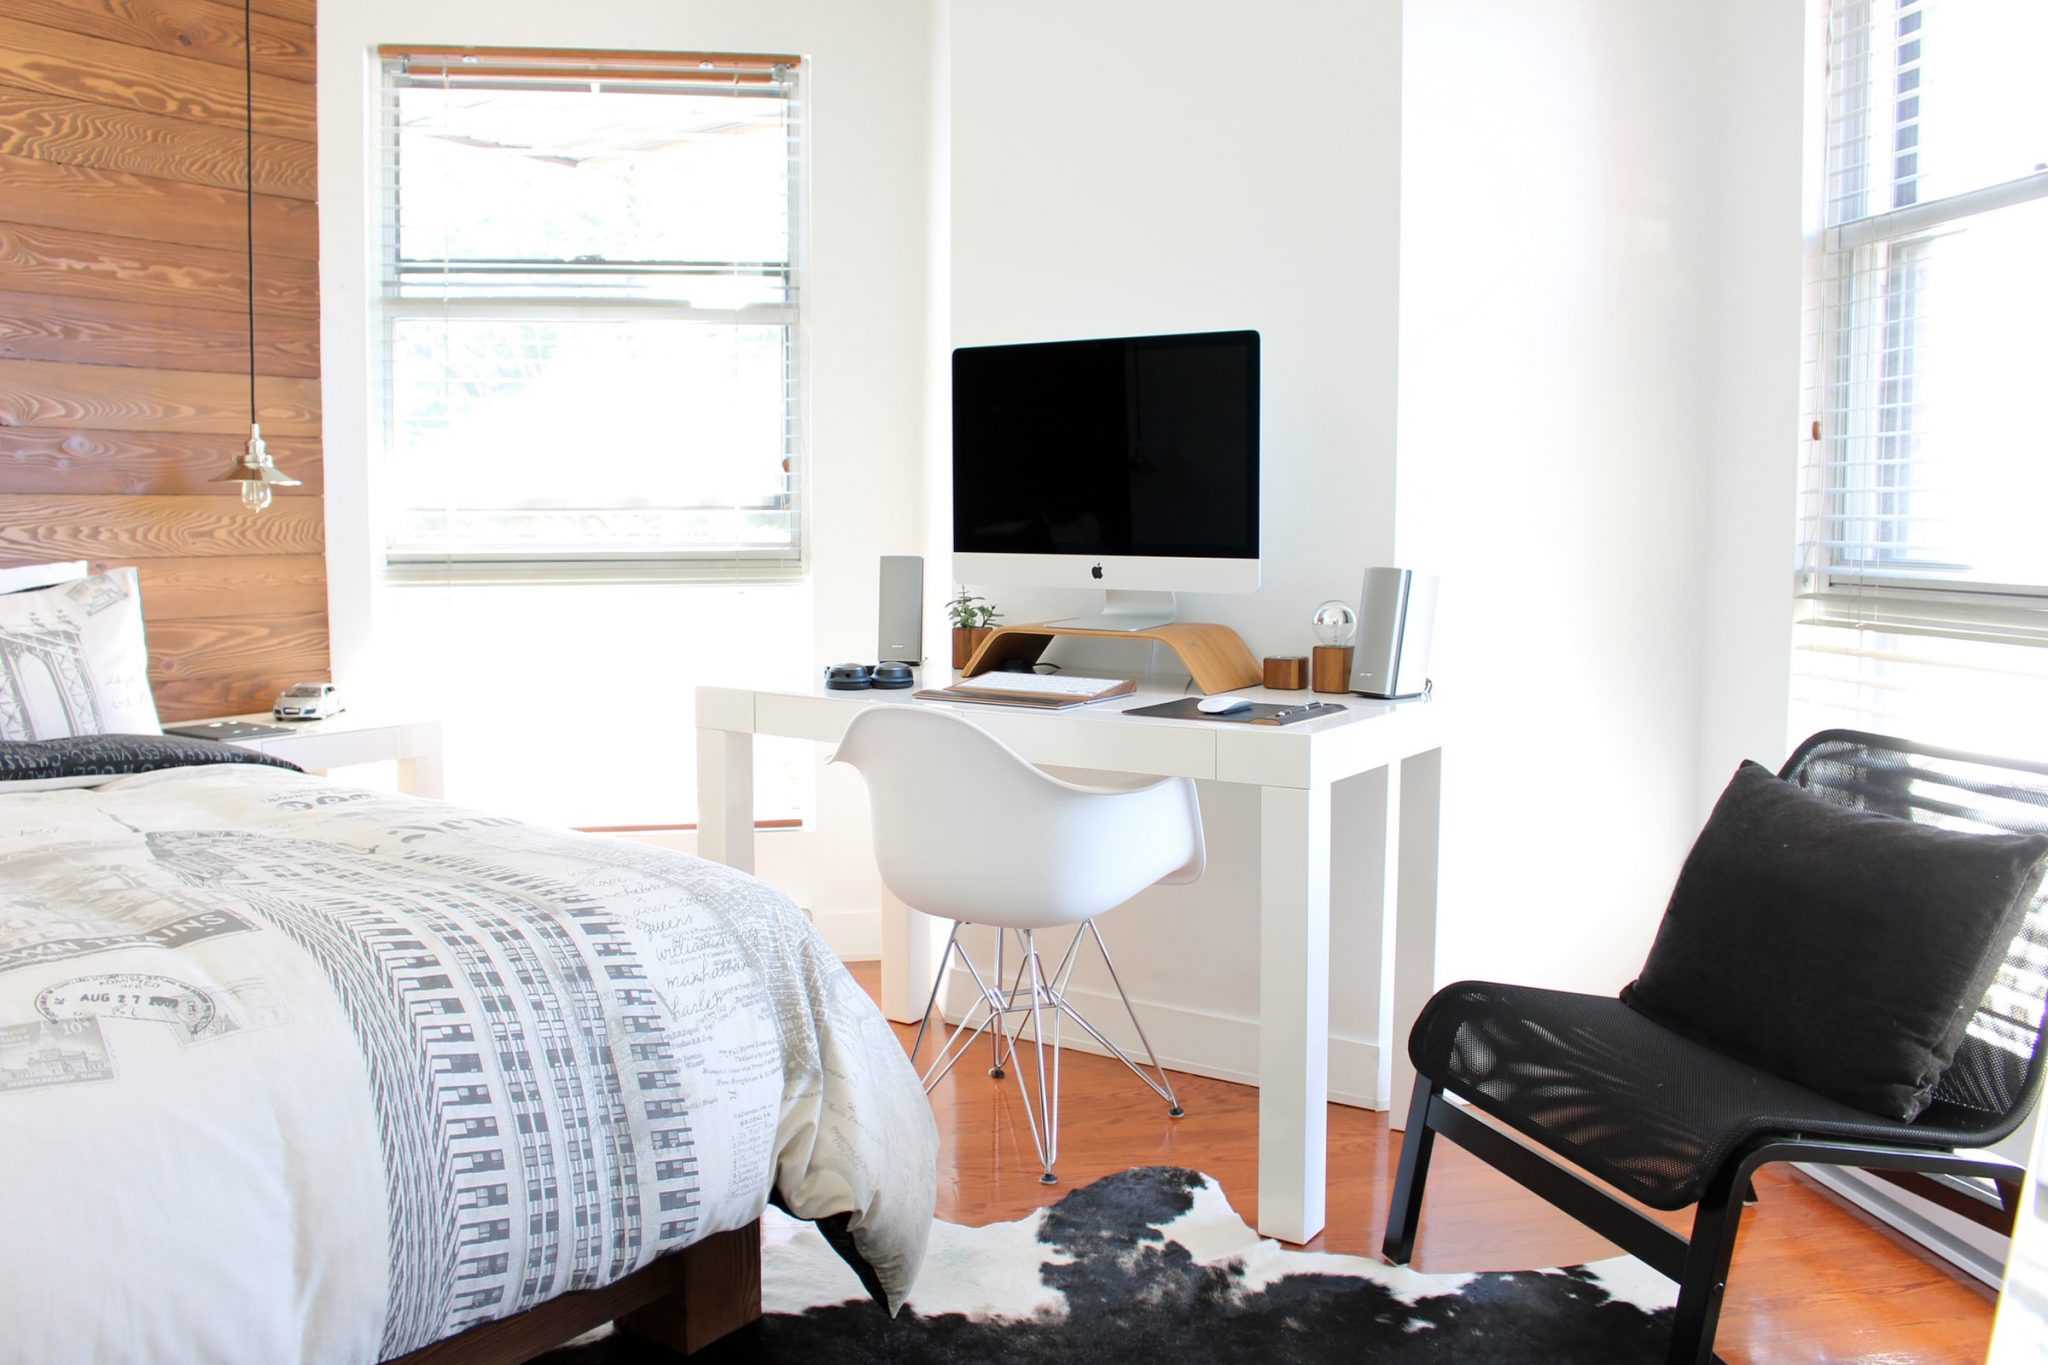 Student Accommodation in Bournemouth